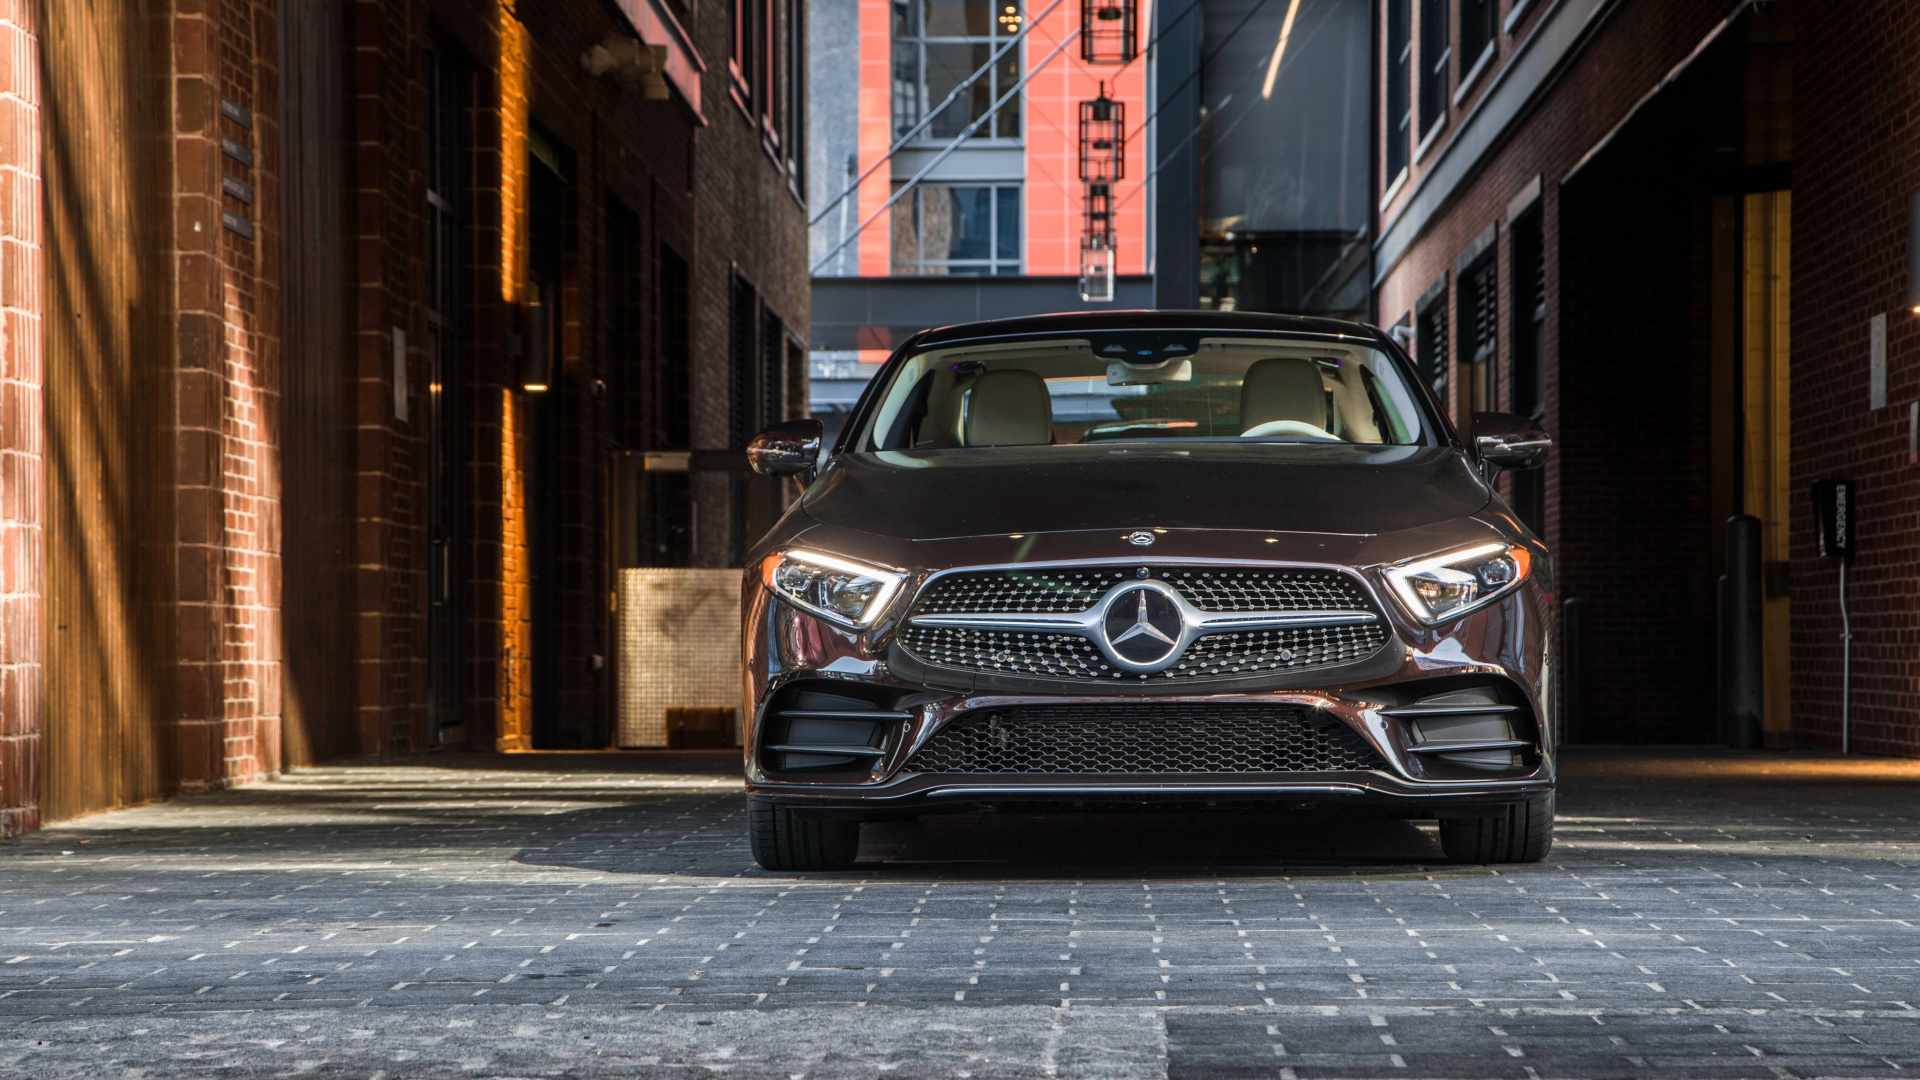 Black Mercedes Benz Car Parked Beside Brown Building During Daytime. Wallpaper in 1920x1080 Resolution